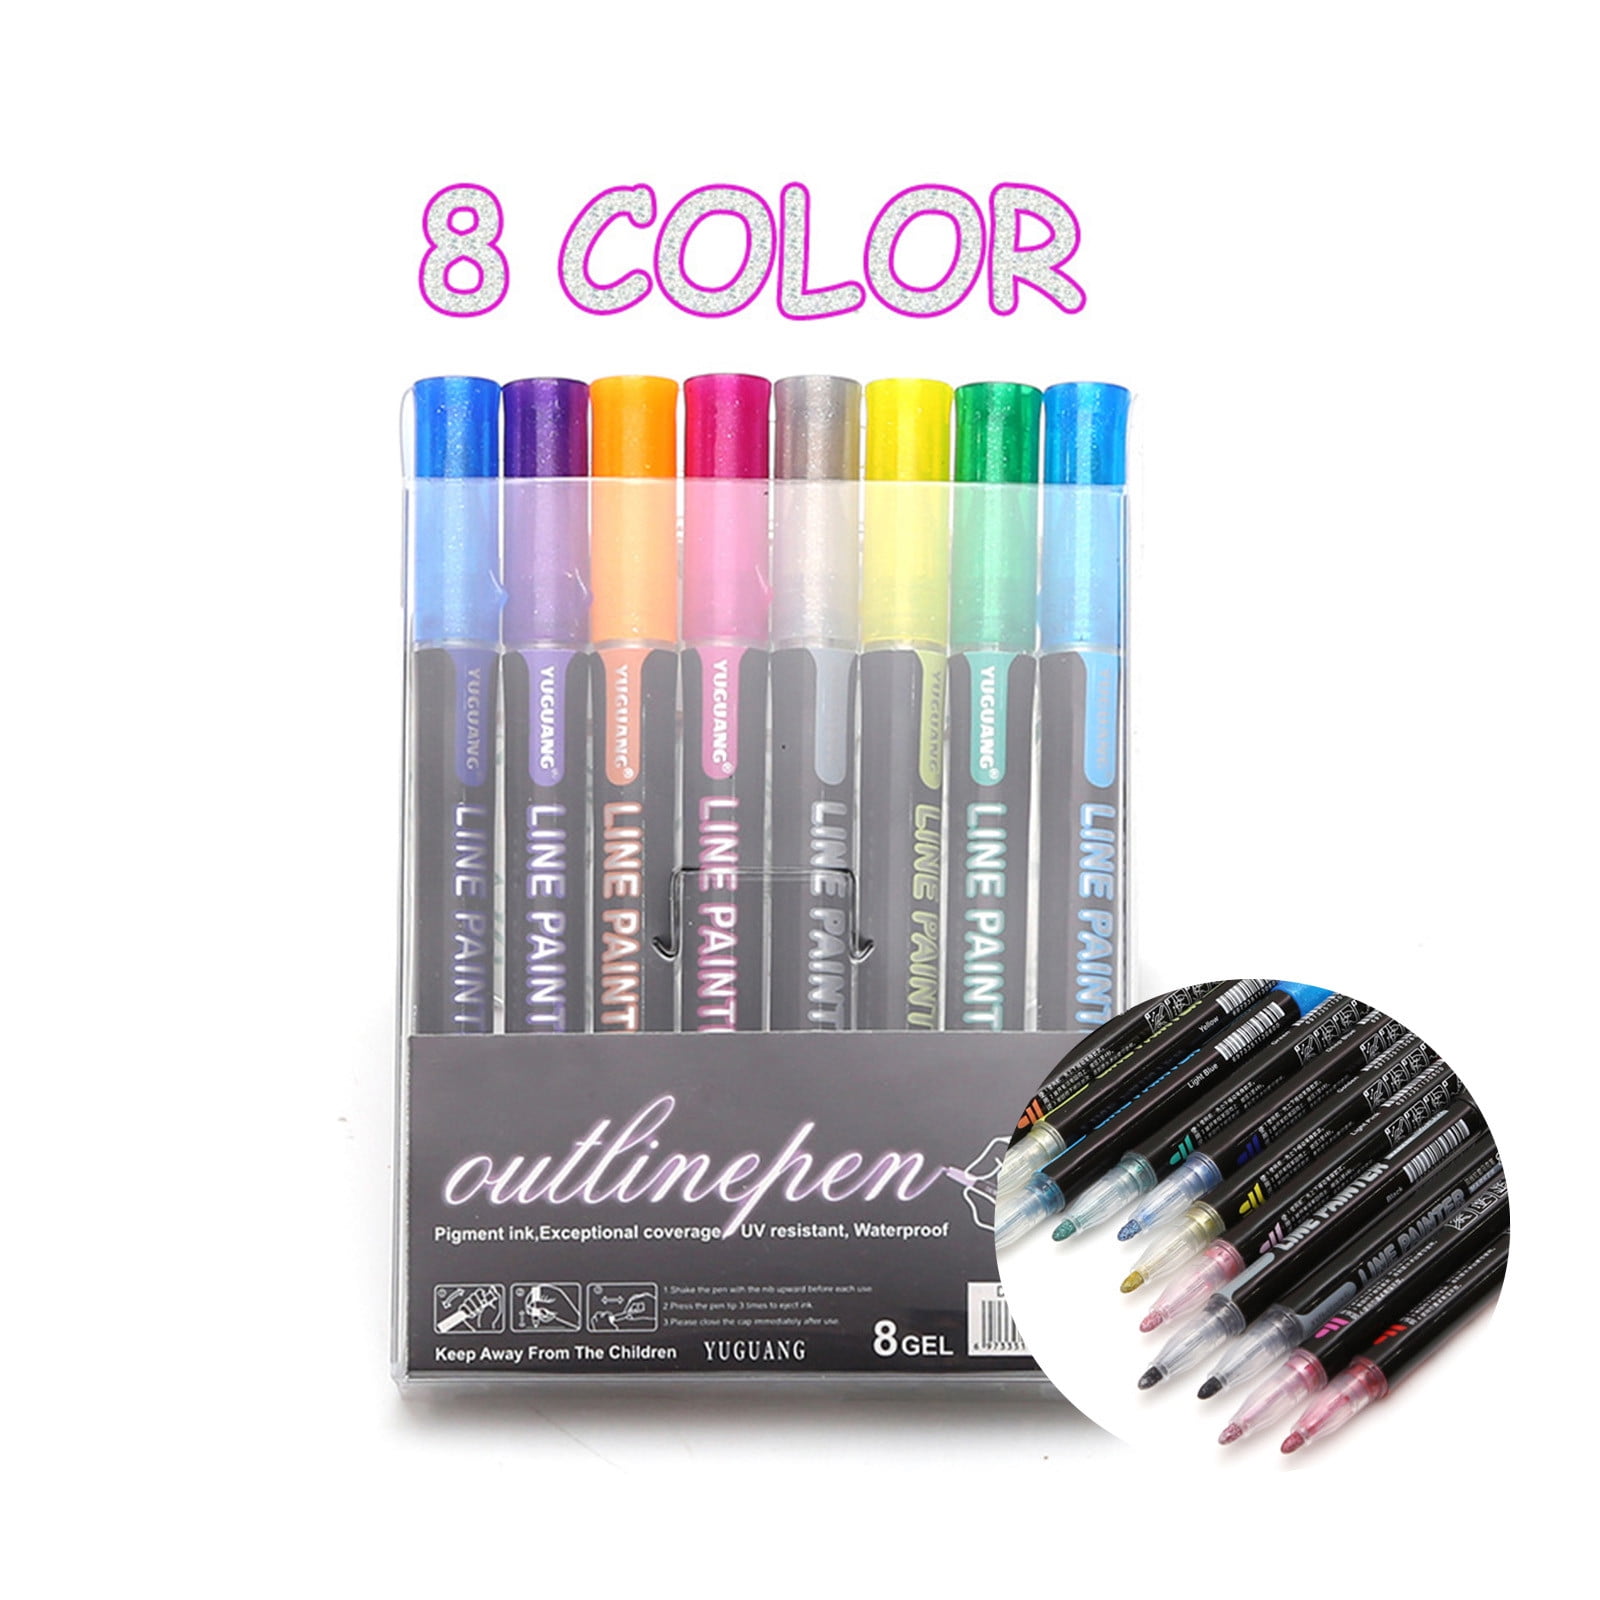 Clearance SDJMa Self-Outline Metallic Markers, 12 Colors, Shiny Outline Marker  Set, Glitter Double Line Fluorescent Pens for Drawing, Greeting Card,  Journal, Note Taking, Office School Supplies 